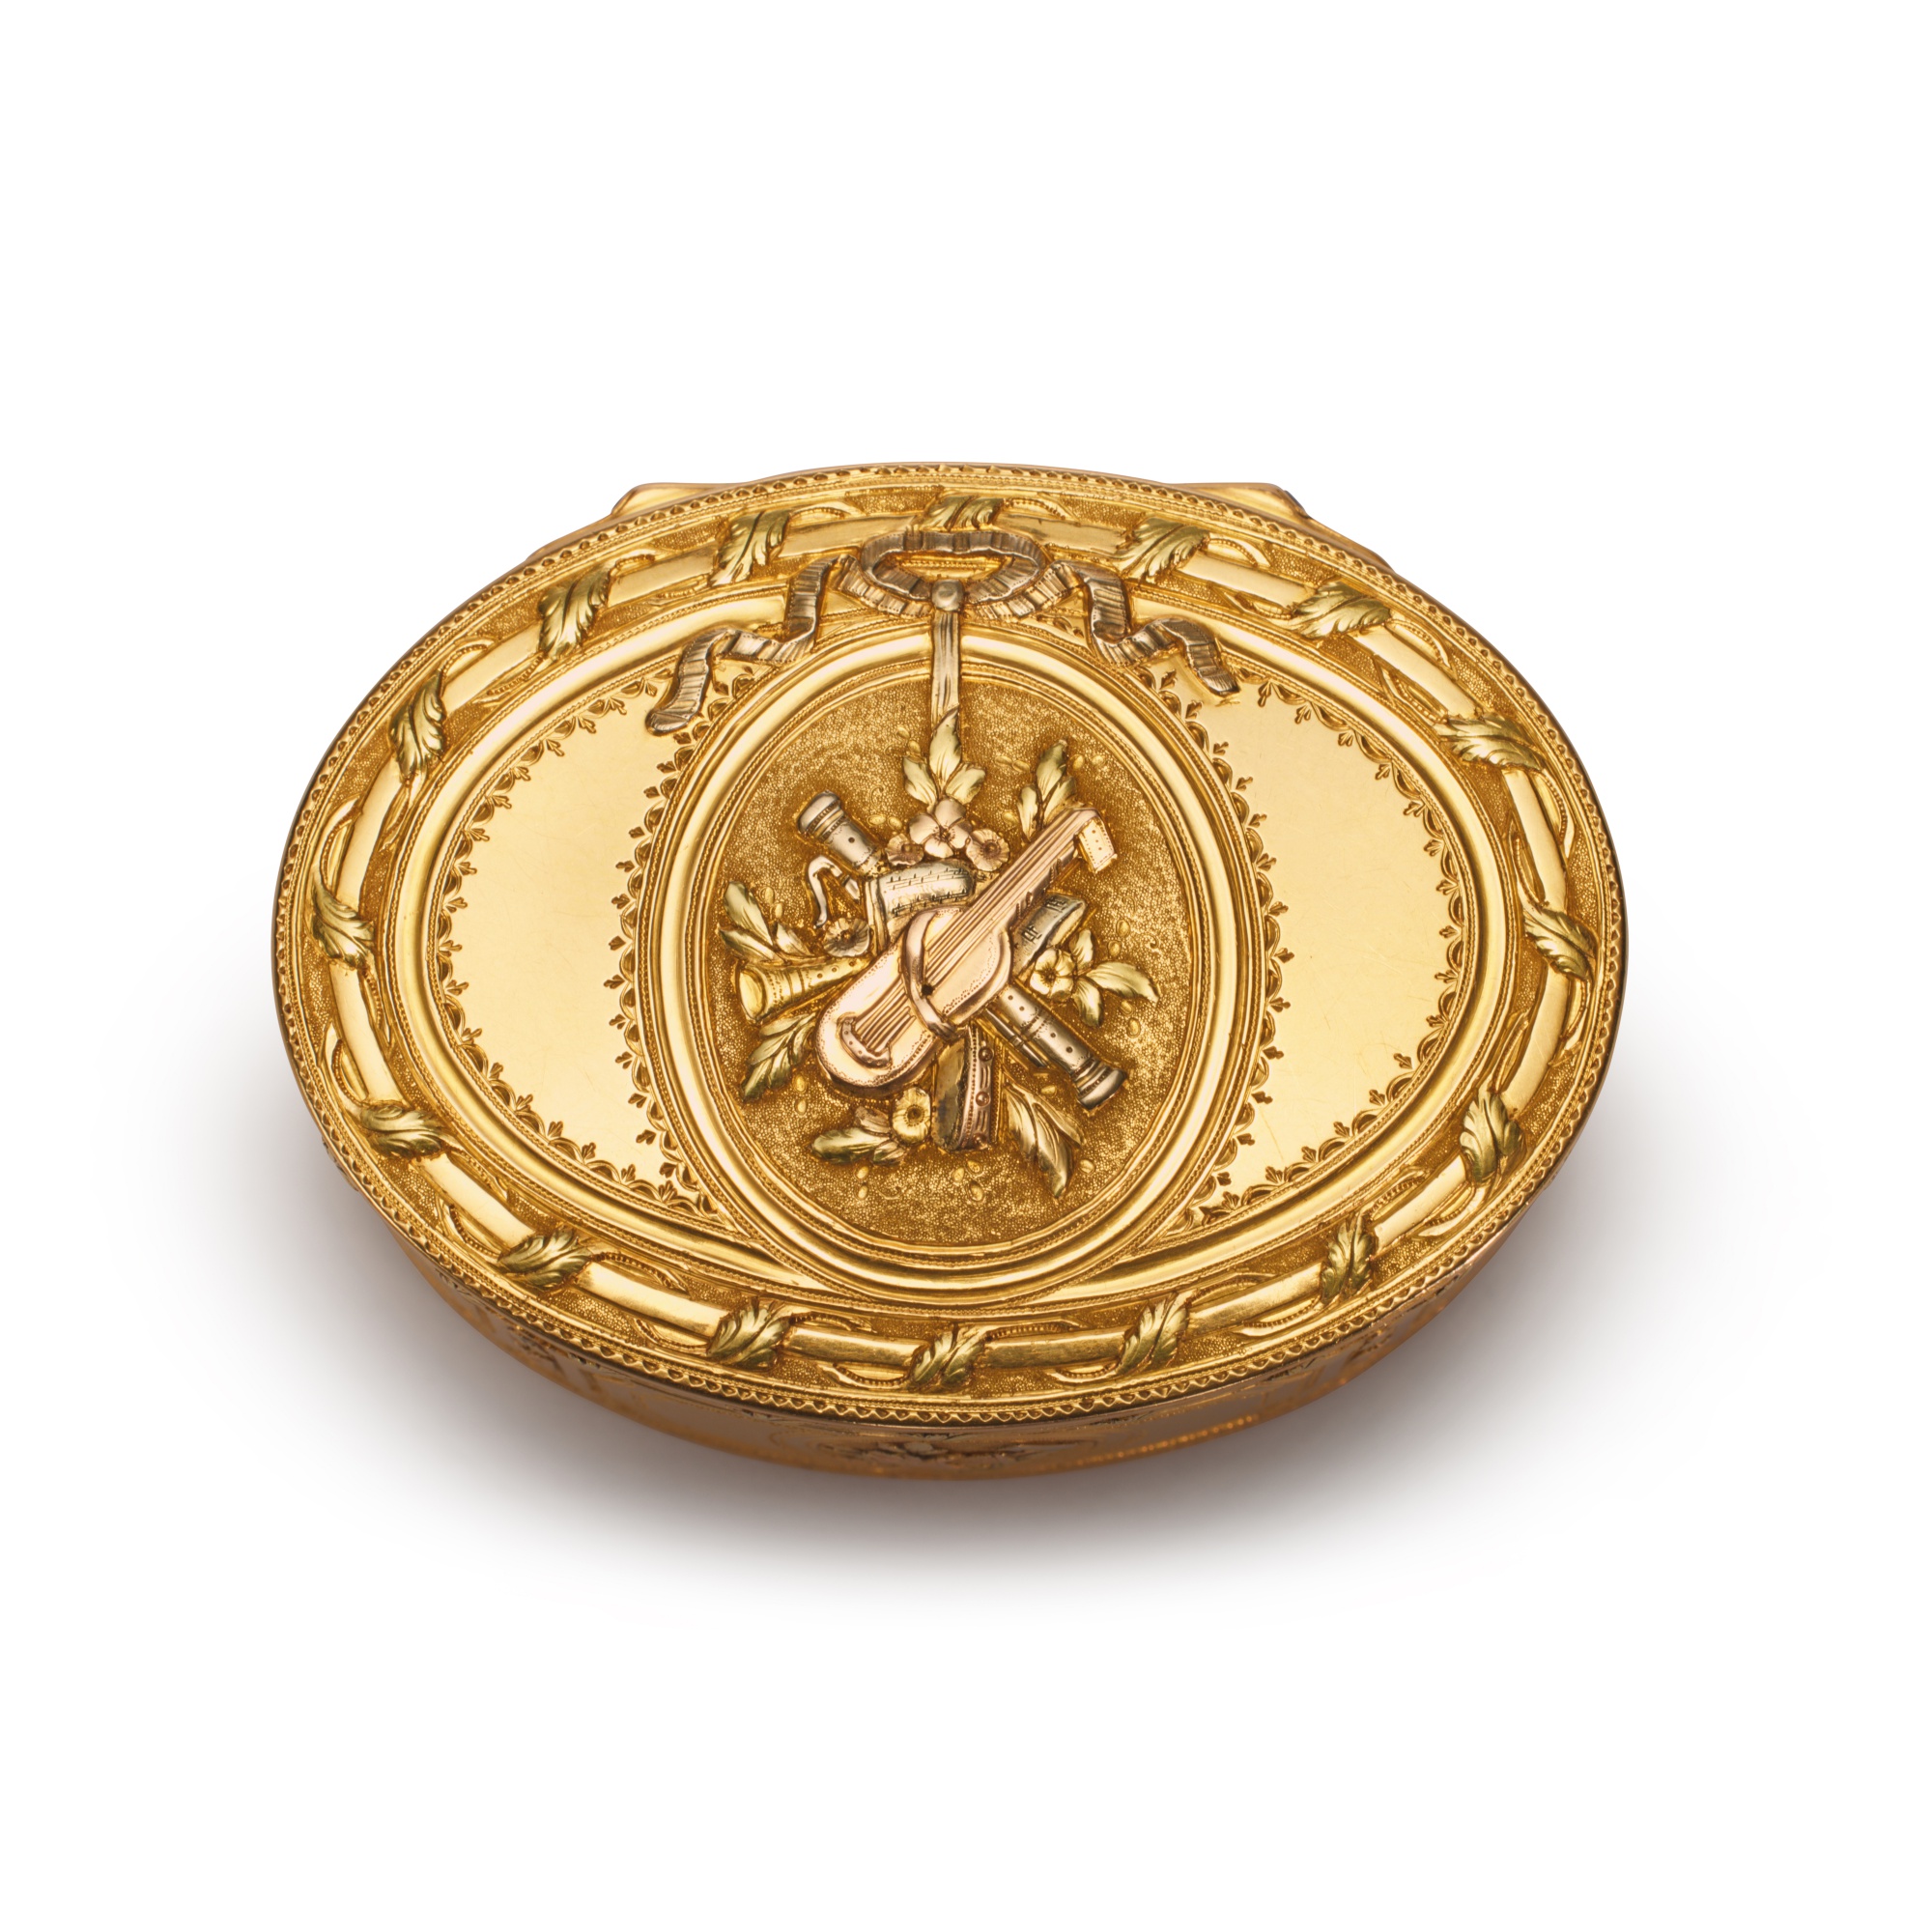 A Louis XV Vari-Color Gold Oval Snuff Box, Pierre-Fran&#231;ois Royer, Paris, 1769, with the Charge